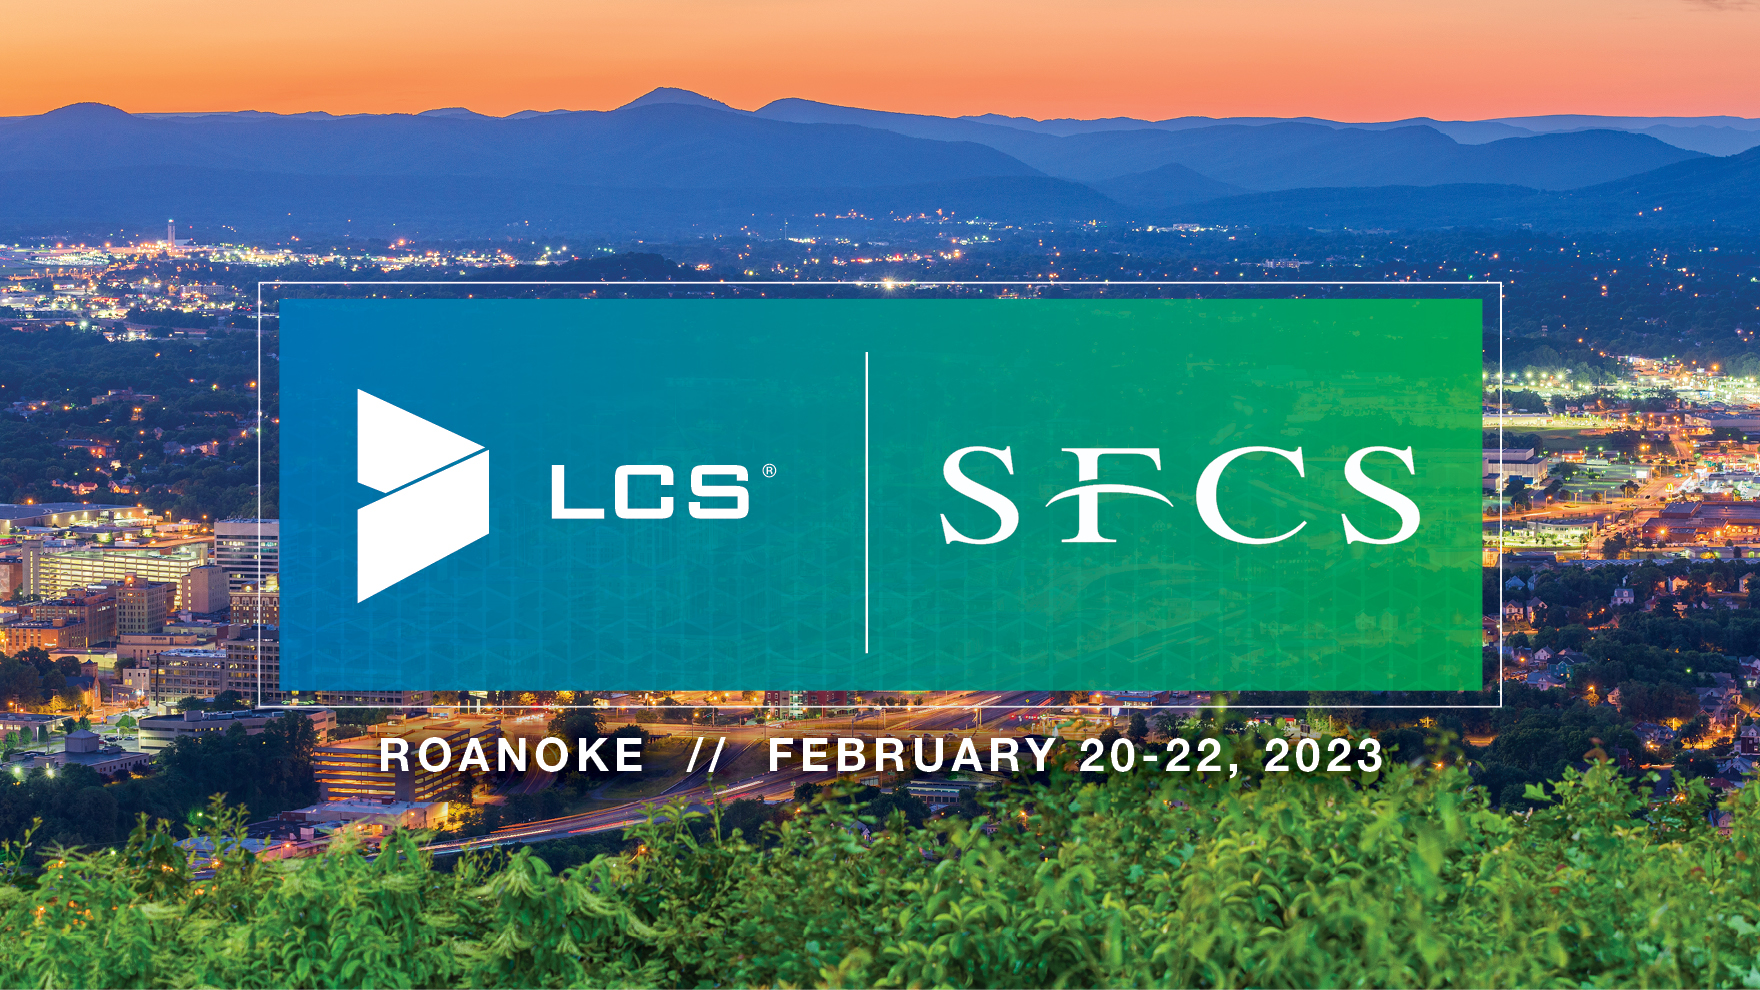 LCS is attending SFCS By Design Conference in Roanoke, February 20-22, 2023